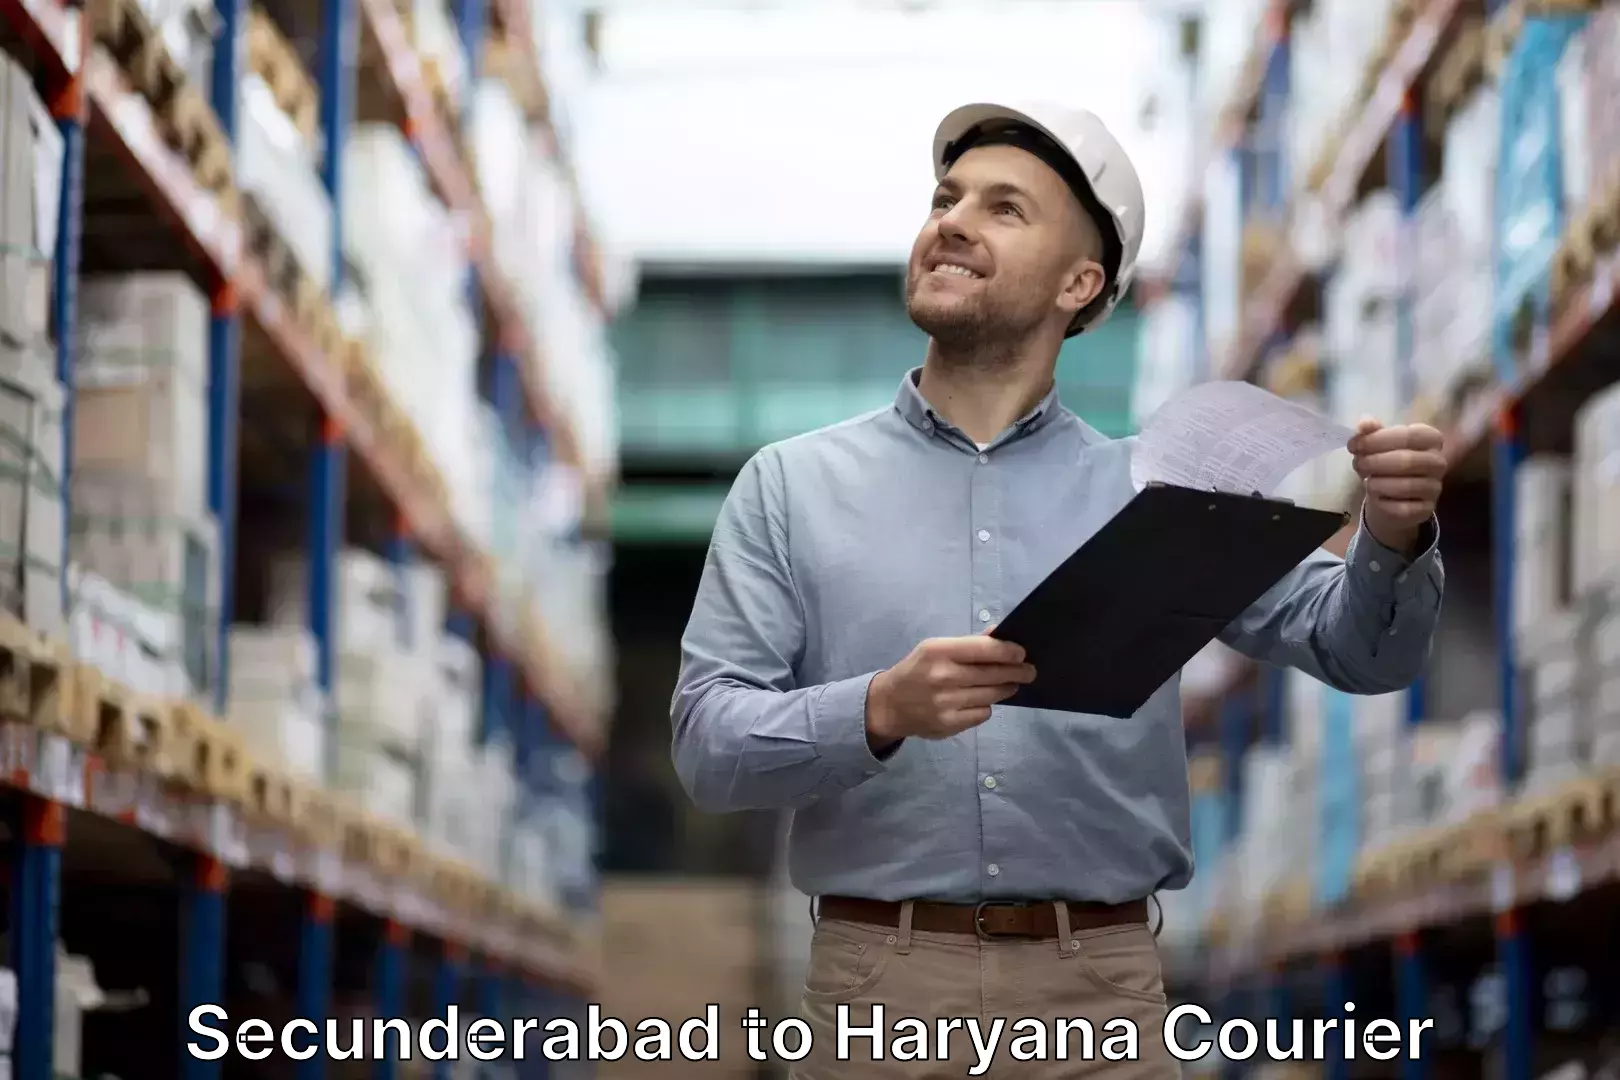 Luggage transport consultancy Secunderabad to Haryana